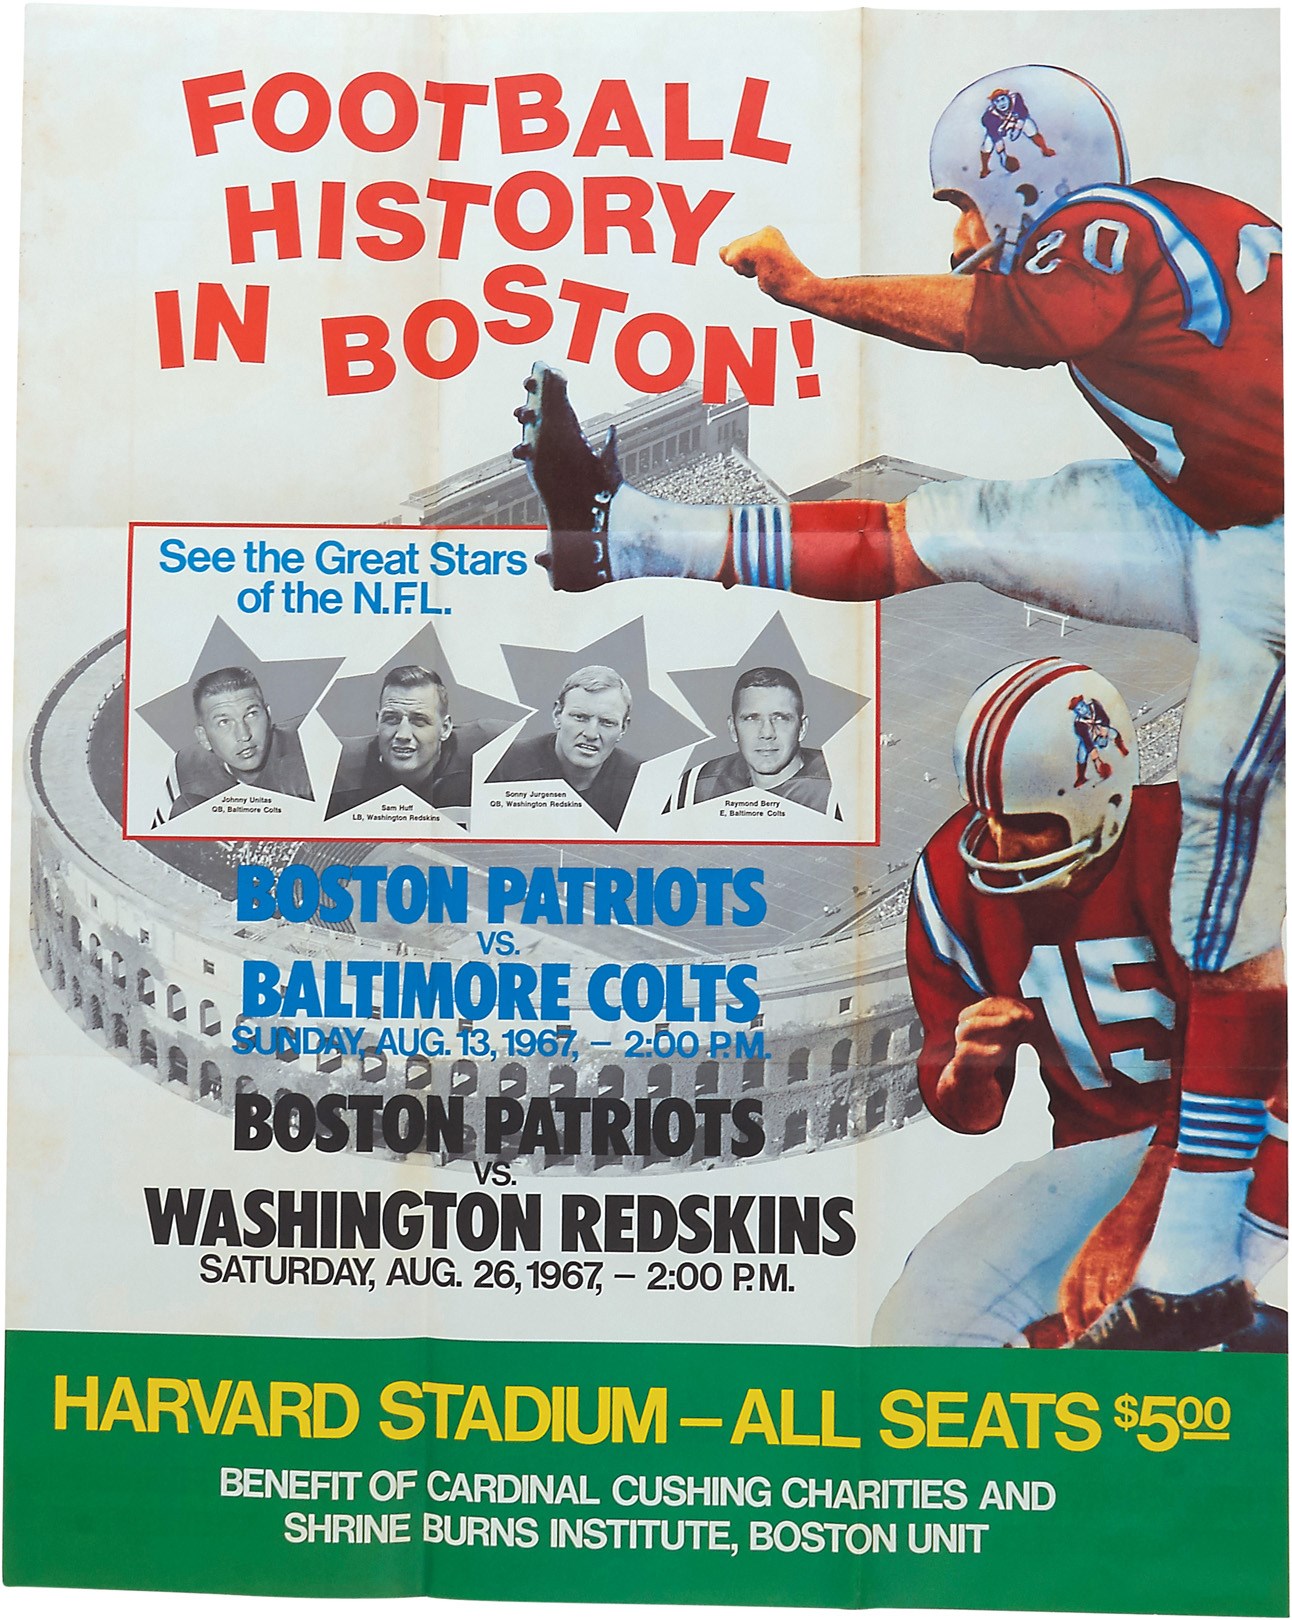 Internet Only - 1967 Boston Patriots vs. Colts & Redskins NFL "Doubleheader" Advertising Poster